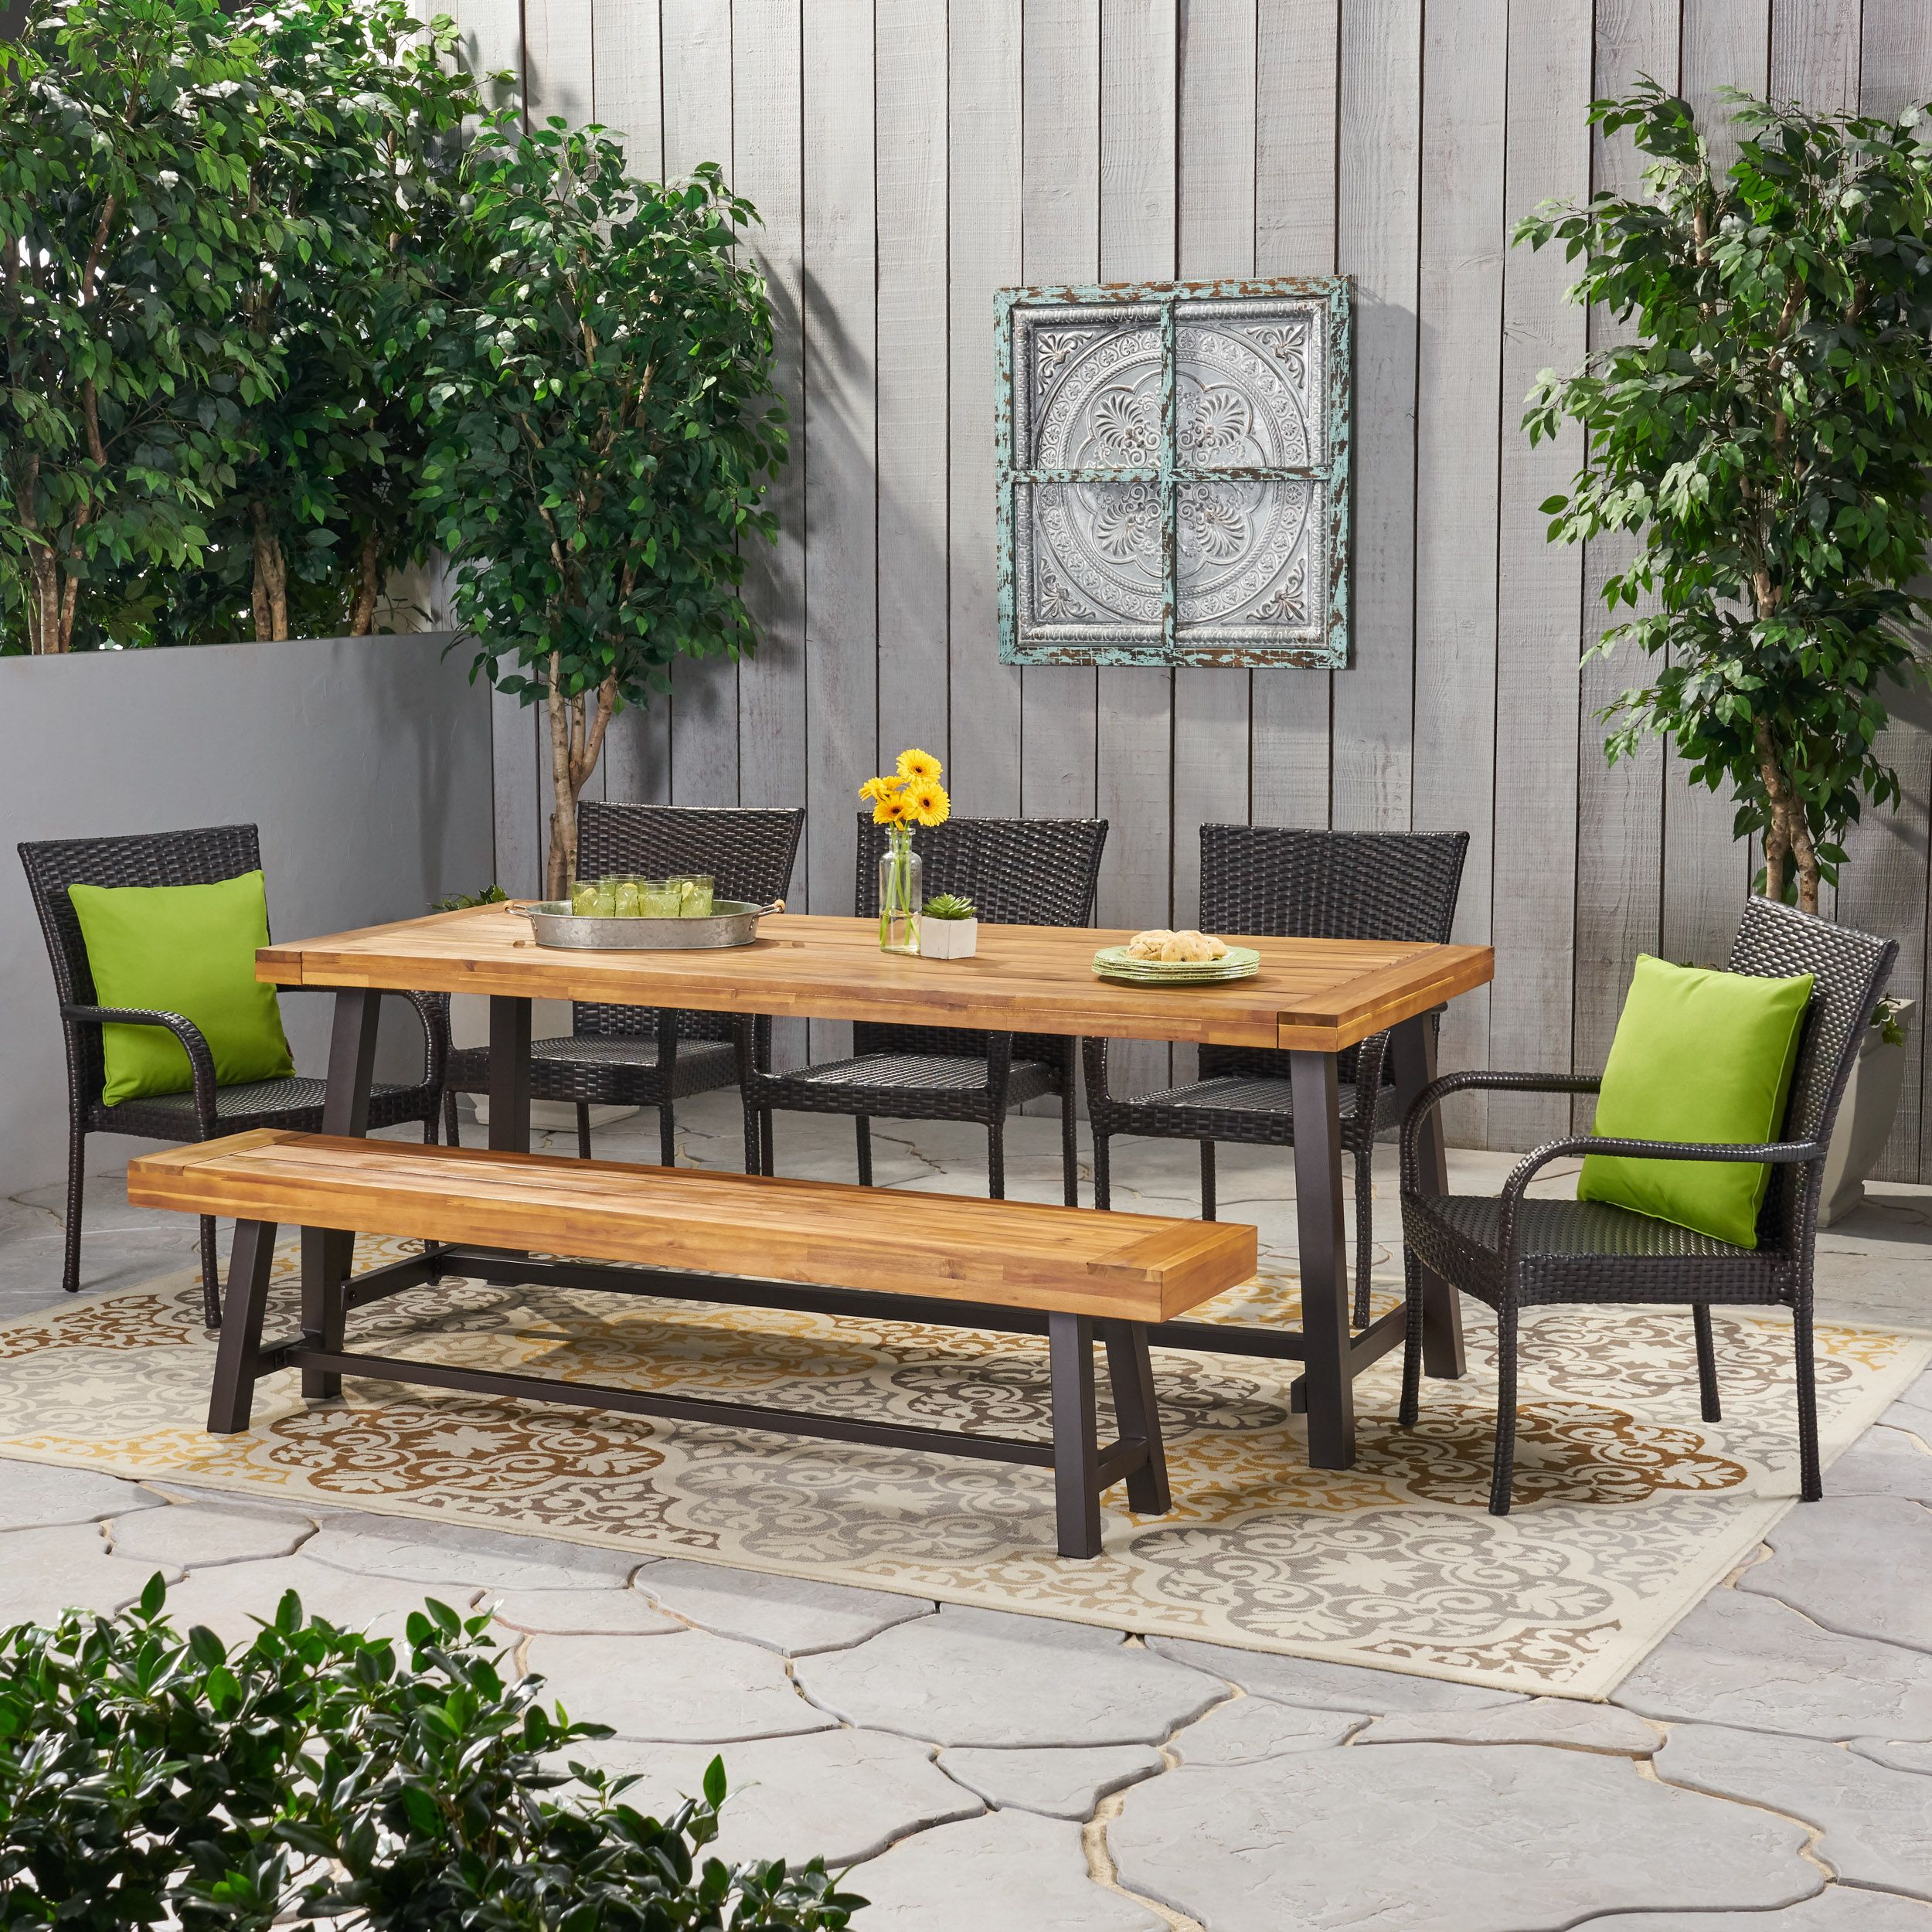 Logan Outdoor Rustic Acacia Wood 8 Seater Dining Set With Dining Bench Intended For Acacia Wood Outdoor Seating Patio Sets (View 6 of 15)